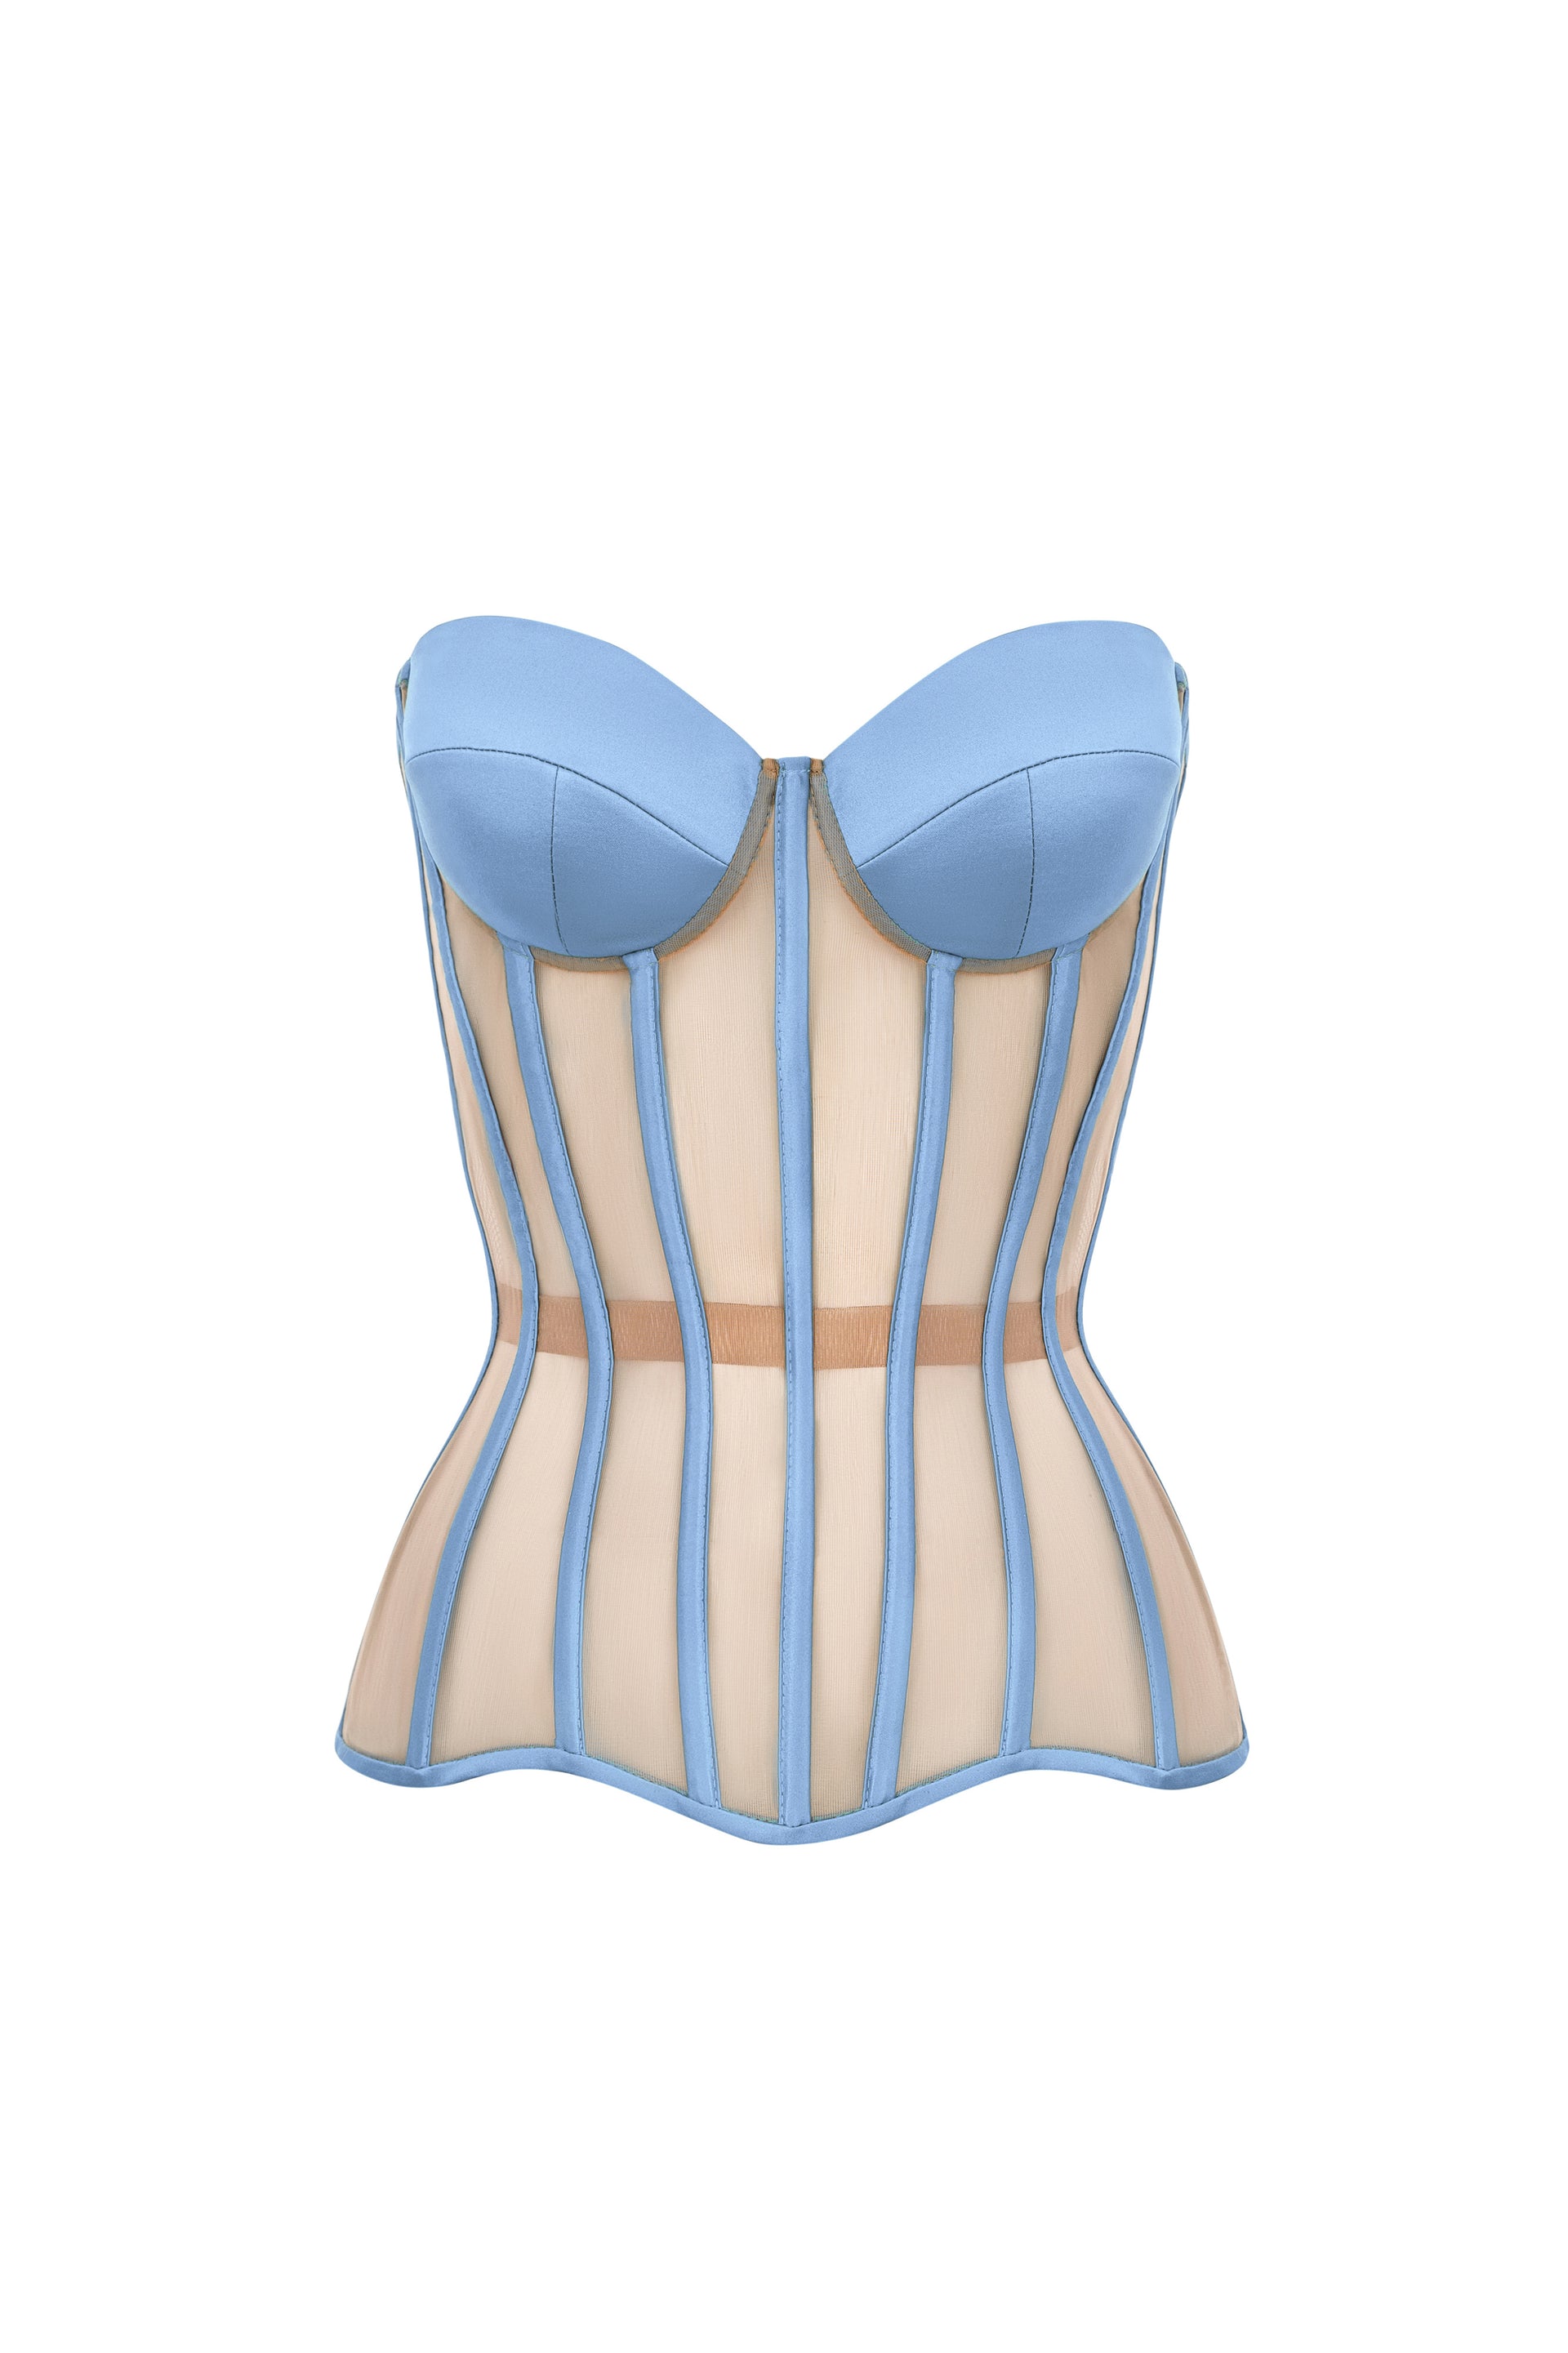 Jeans blue corset with reliefs and satin cups